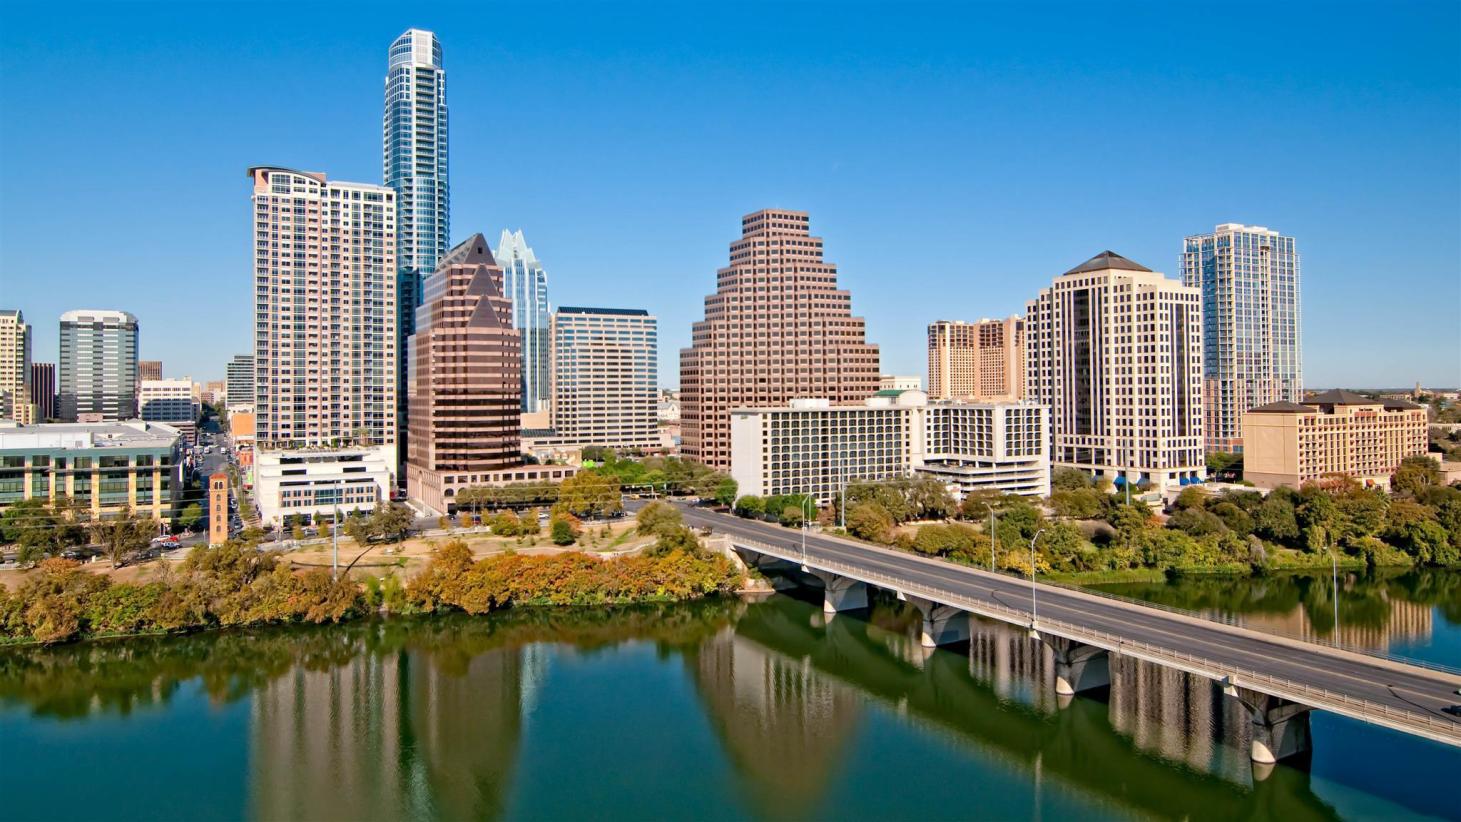 How to Find Luxury Hotels in Austin, Texas